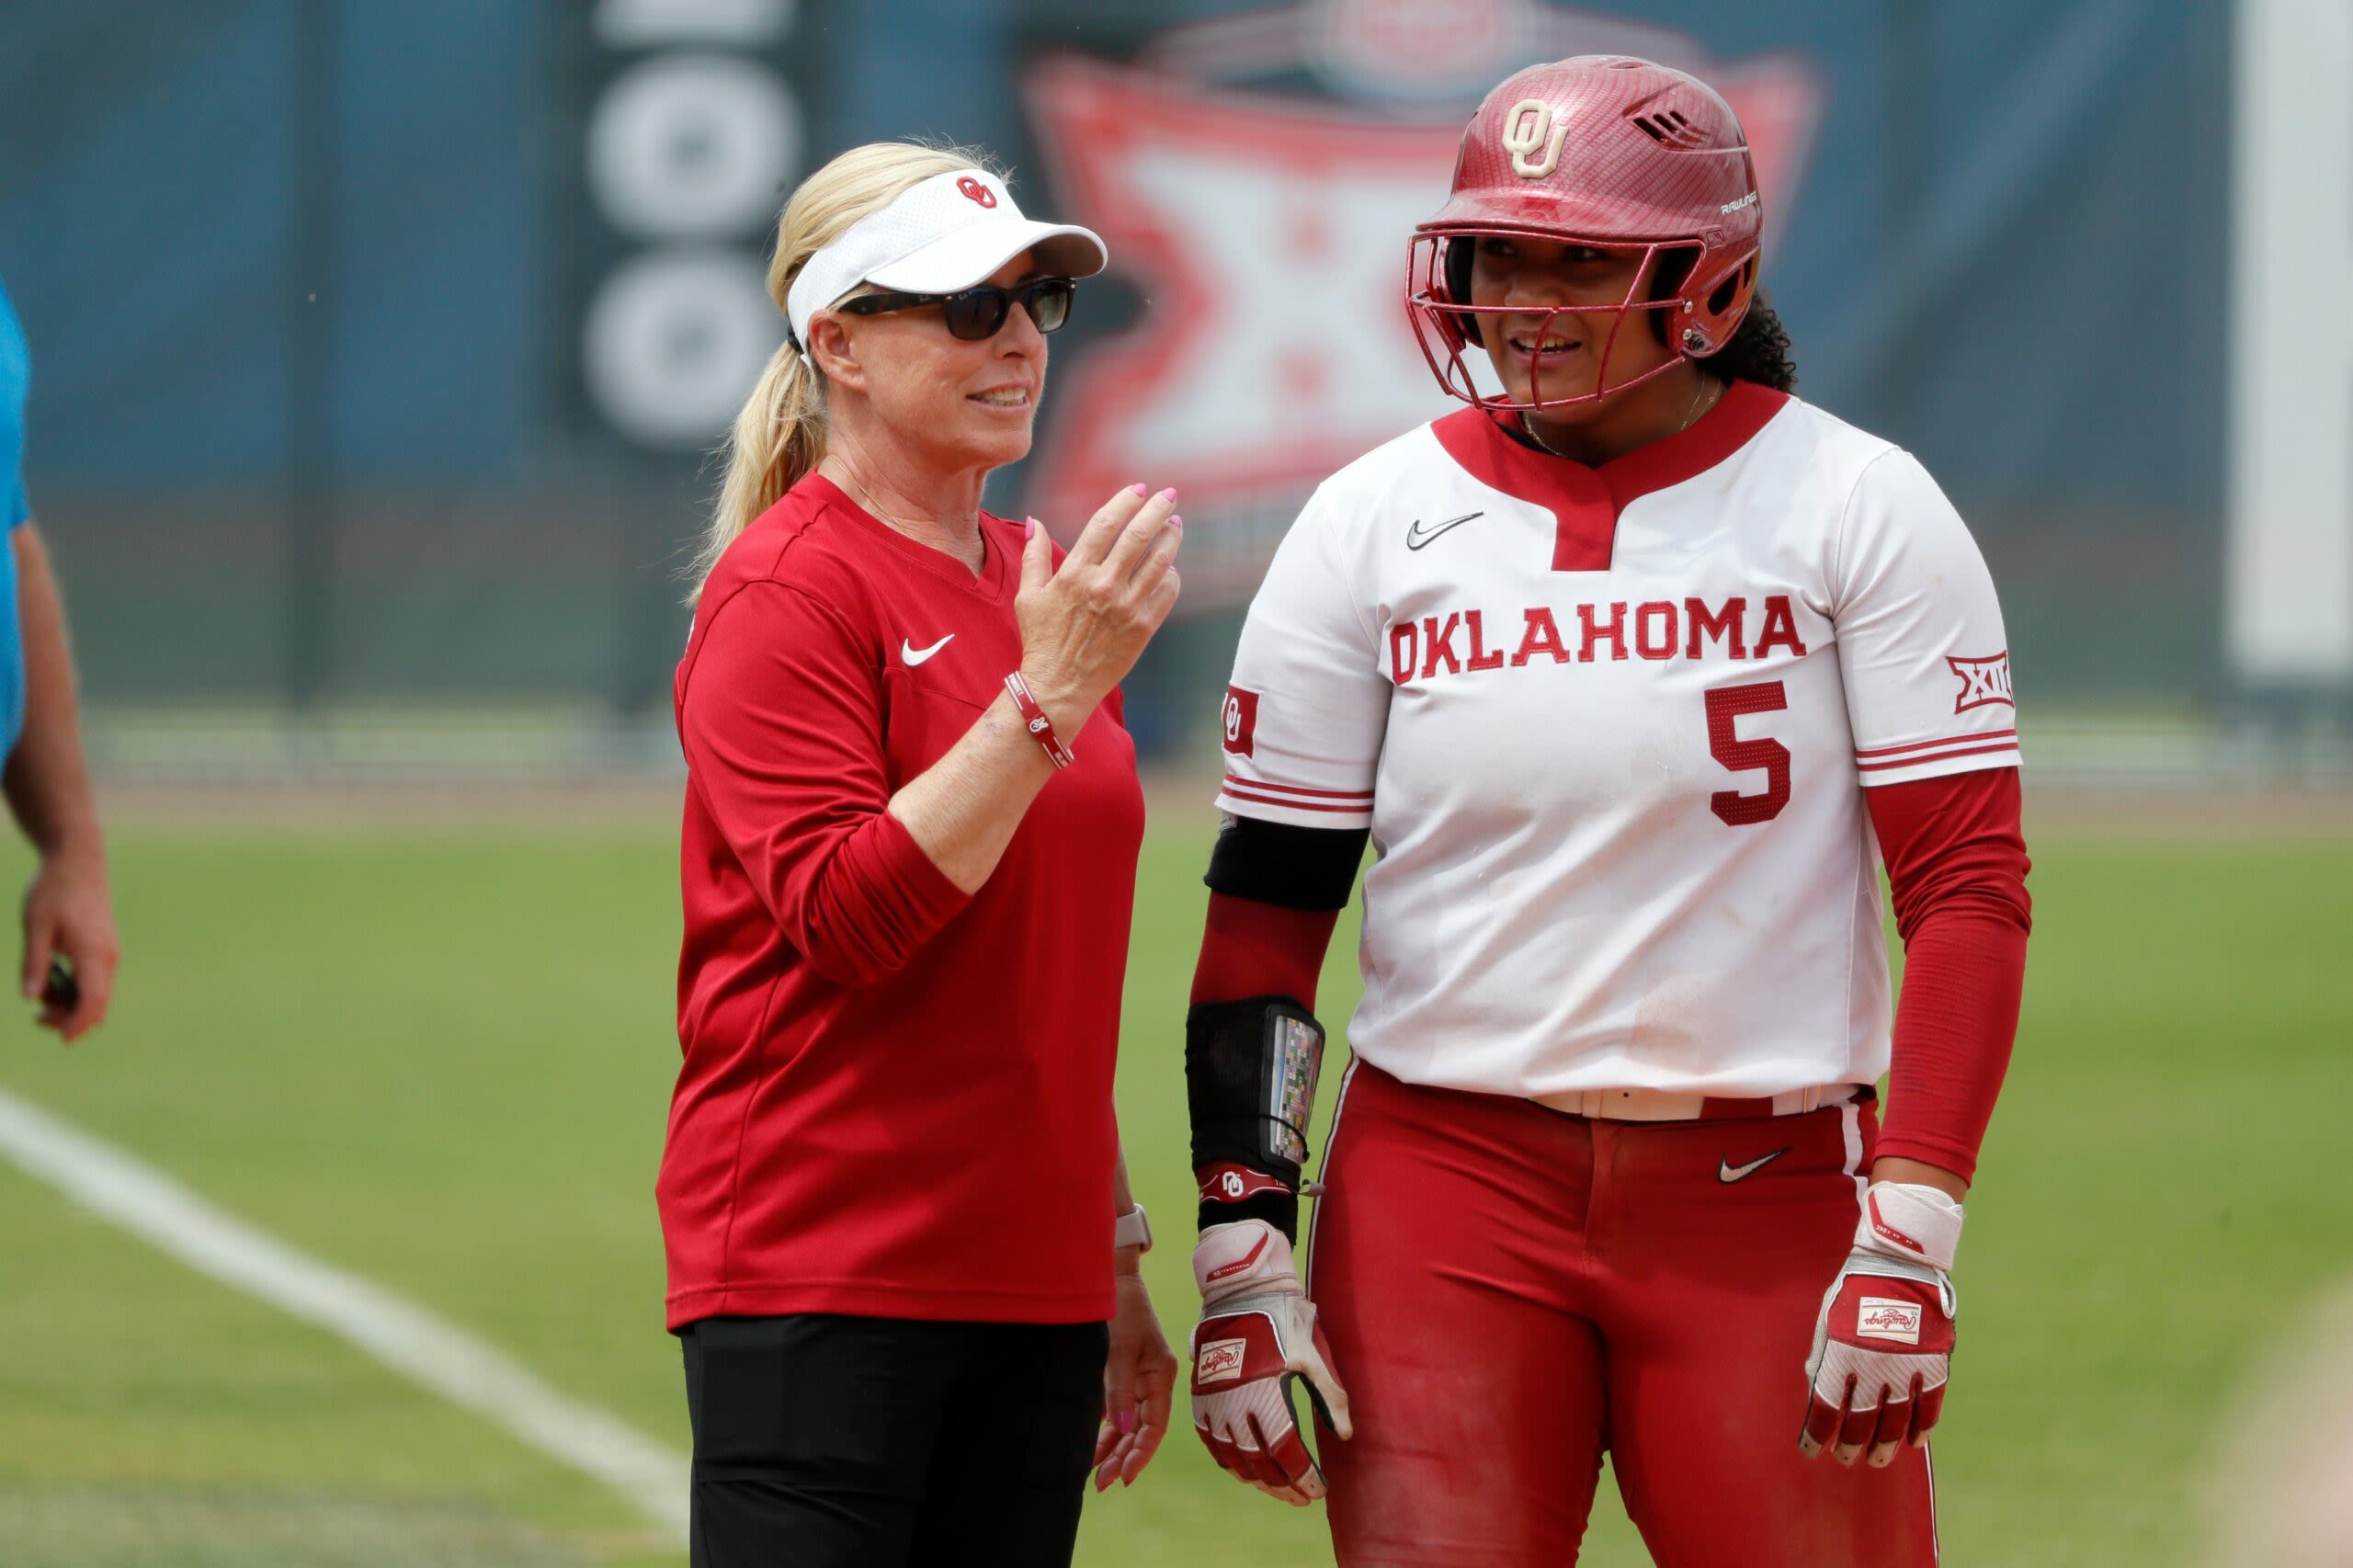 Oklahoma Sooners playing their best softball heading into the Women’s College World Series